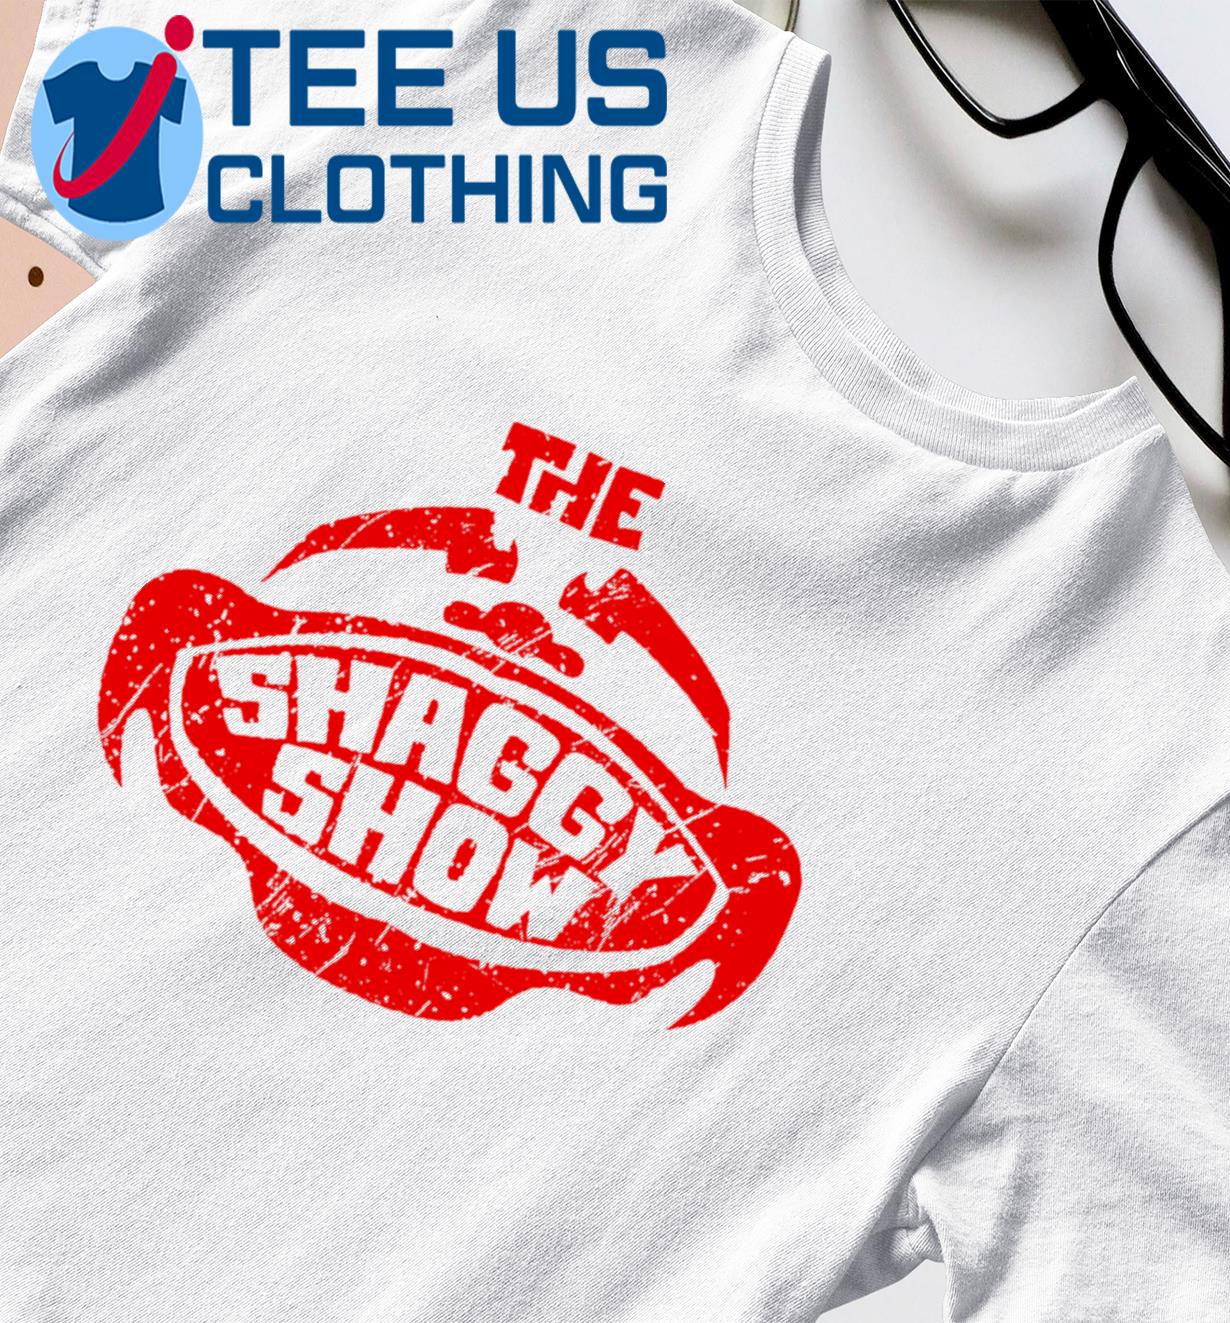 The Shaggy Show Psychopathic Records Shirt